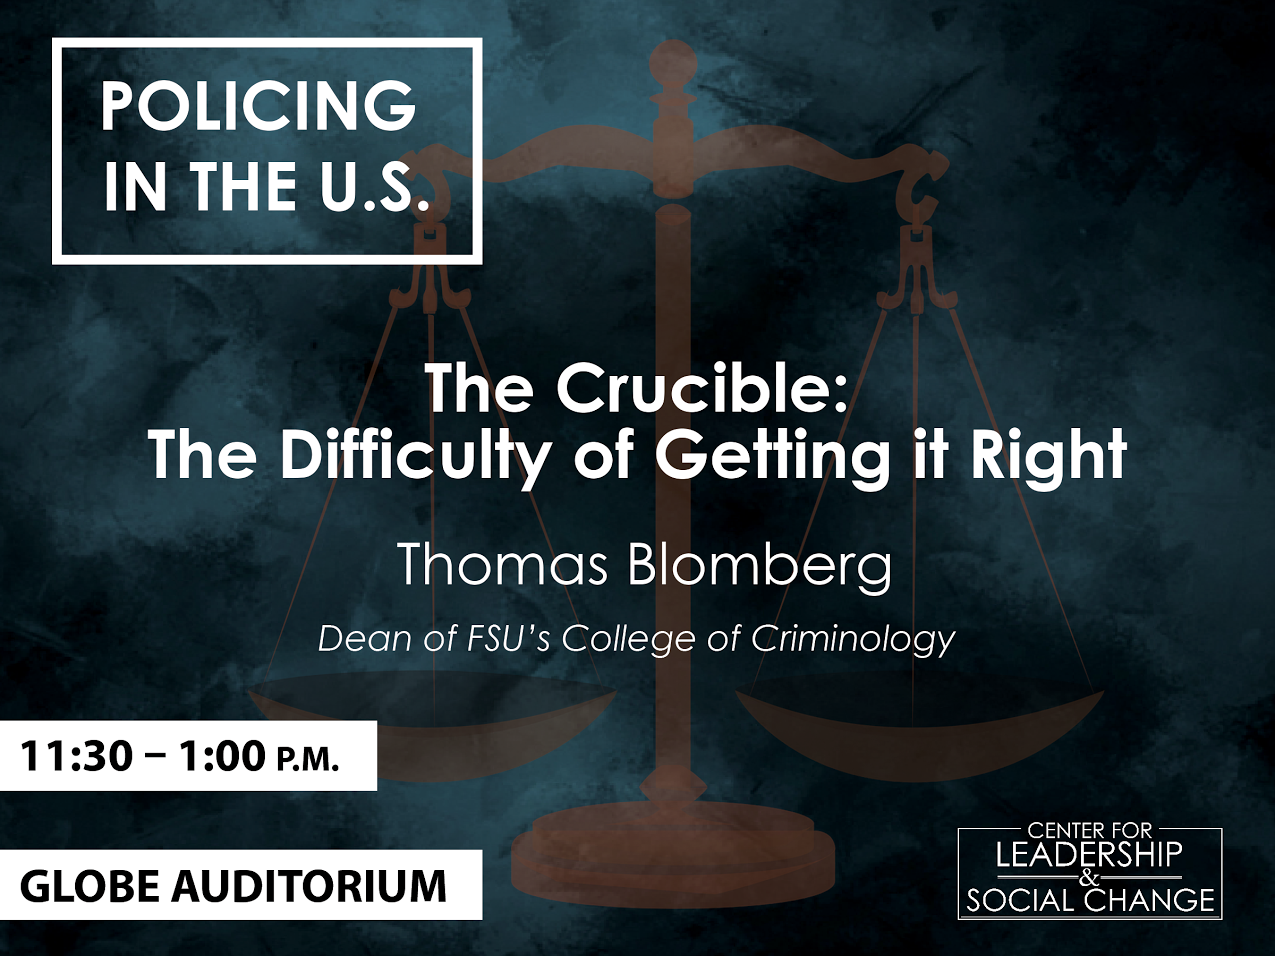 Policing in the U.S.: The Crucible: The Difficulty of Getting it Right; Globe Auditorium (11:30 a.m. - 1:30 p.m.)